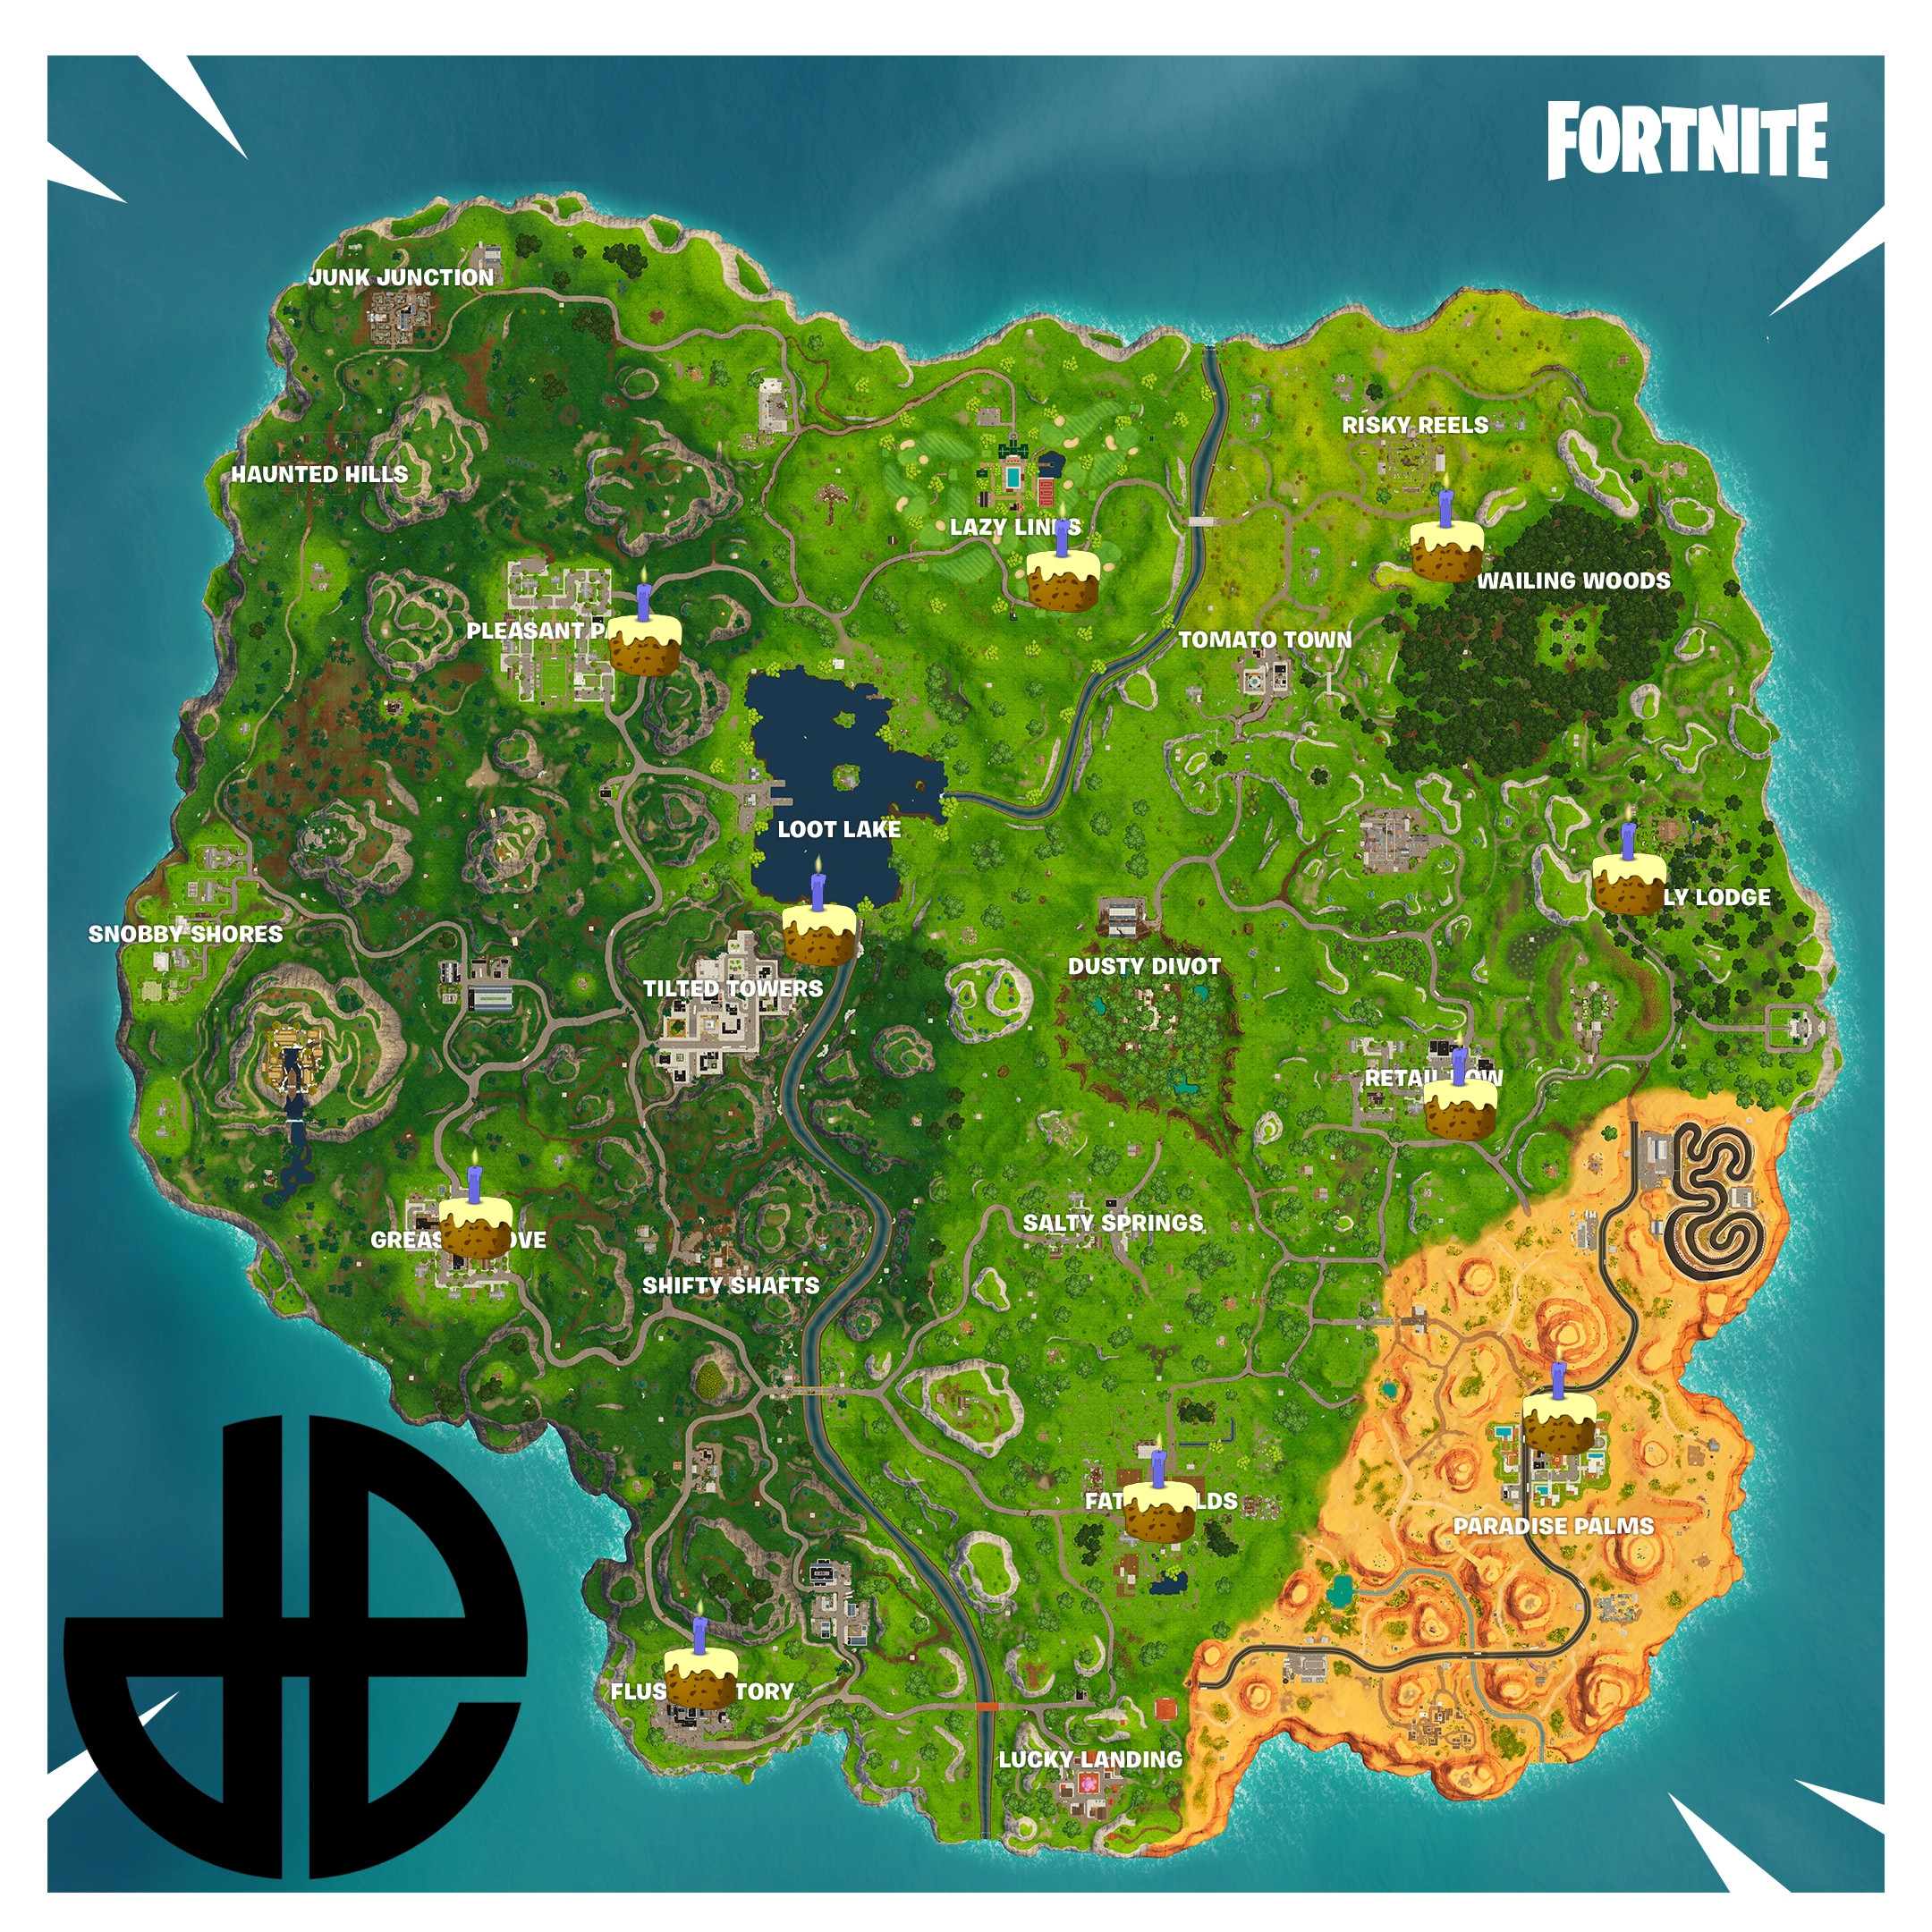 Birthday Cake Map Fortnite
 All Known Birthday Cake Locations for the Fortnite Battle